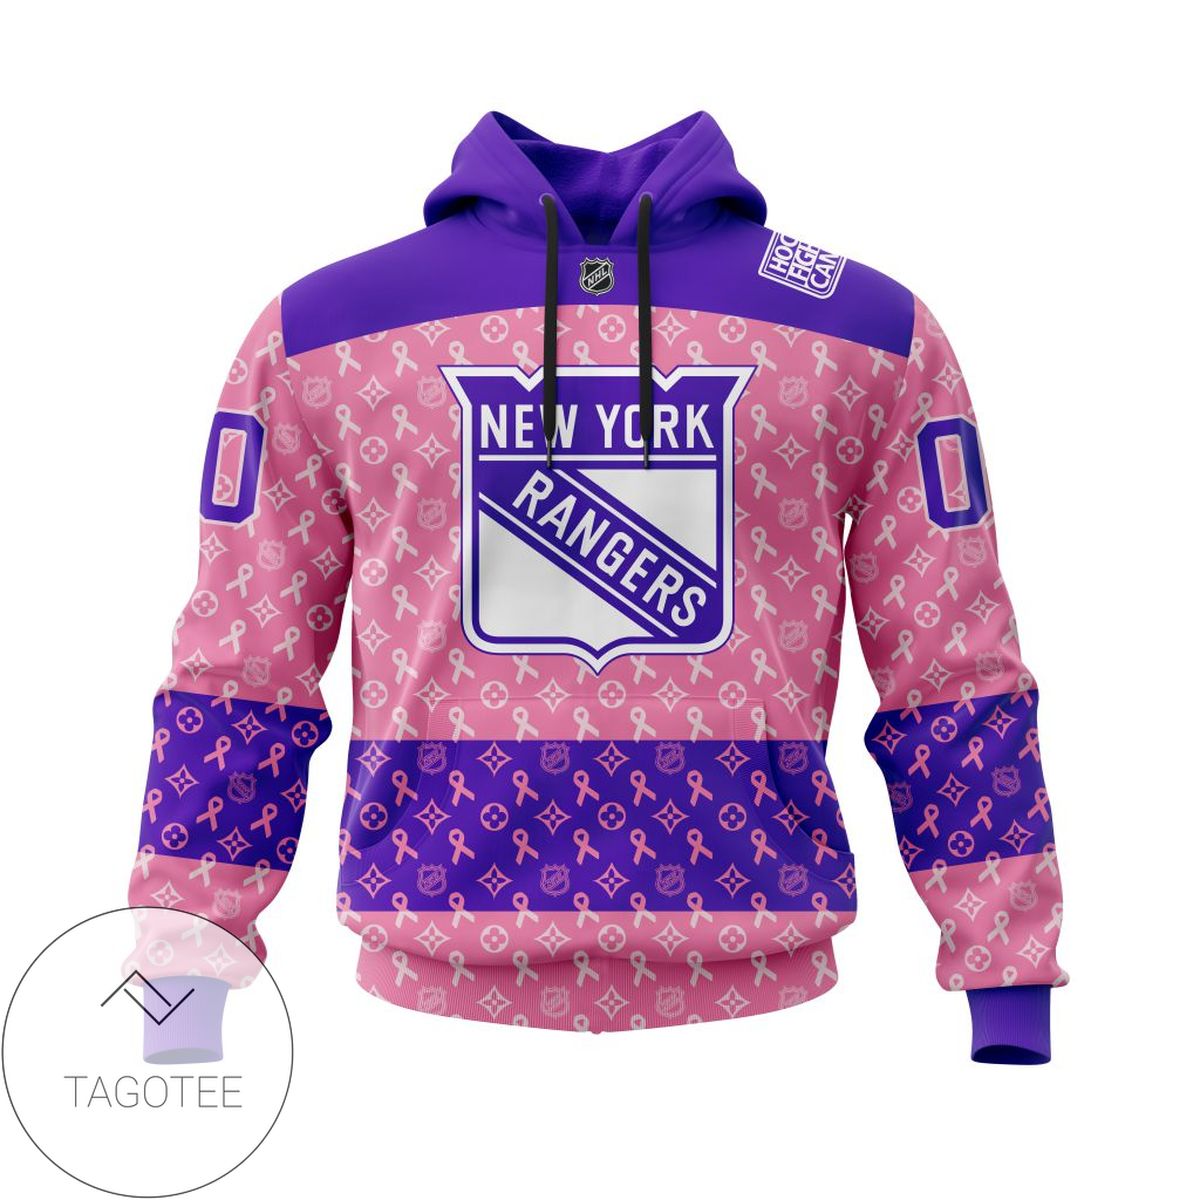 Personalized NHL New York RangersPink Ribbon Fights Cancer Jersey